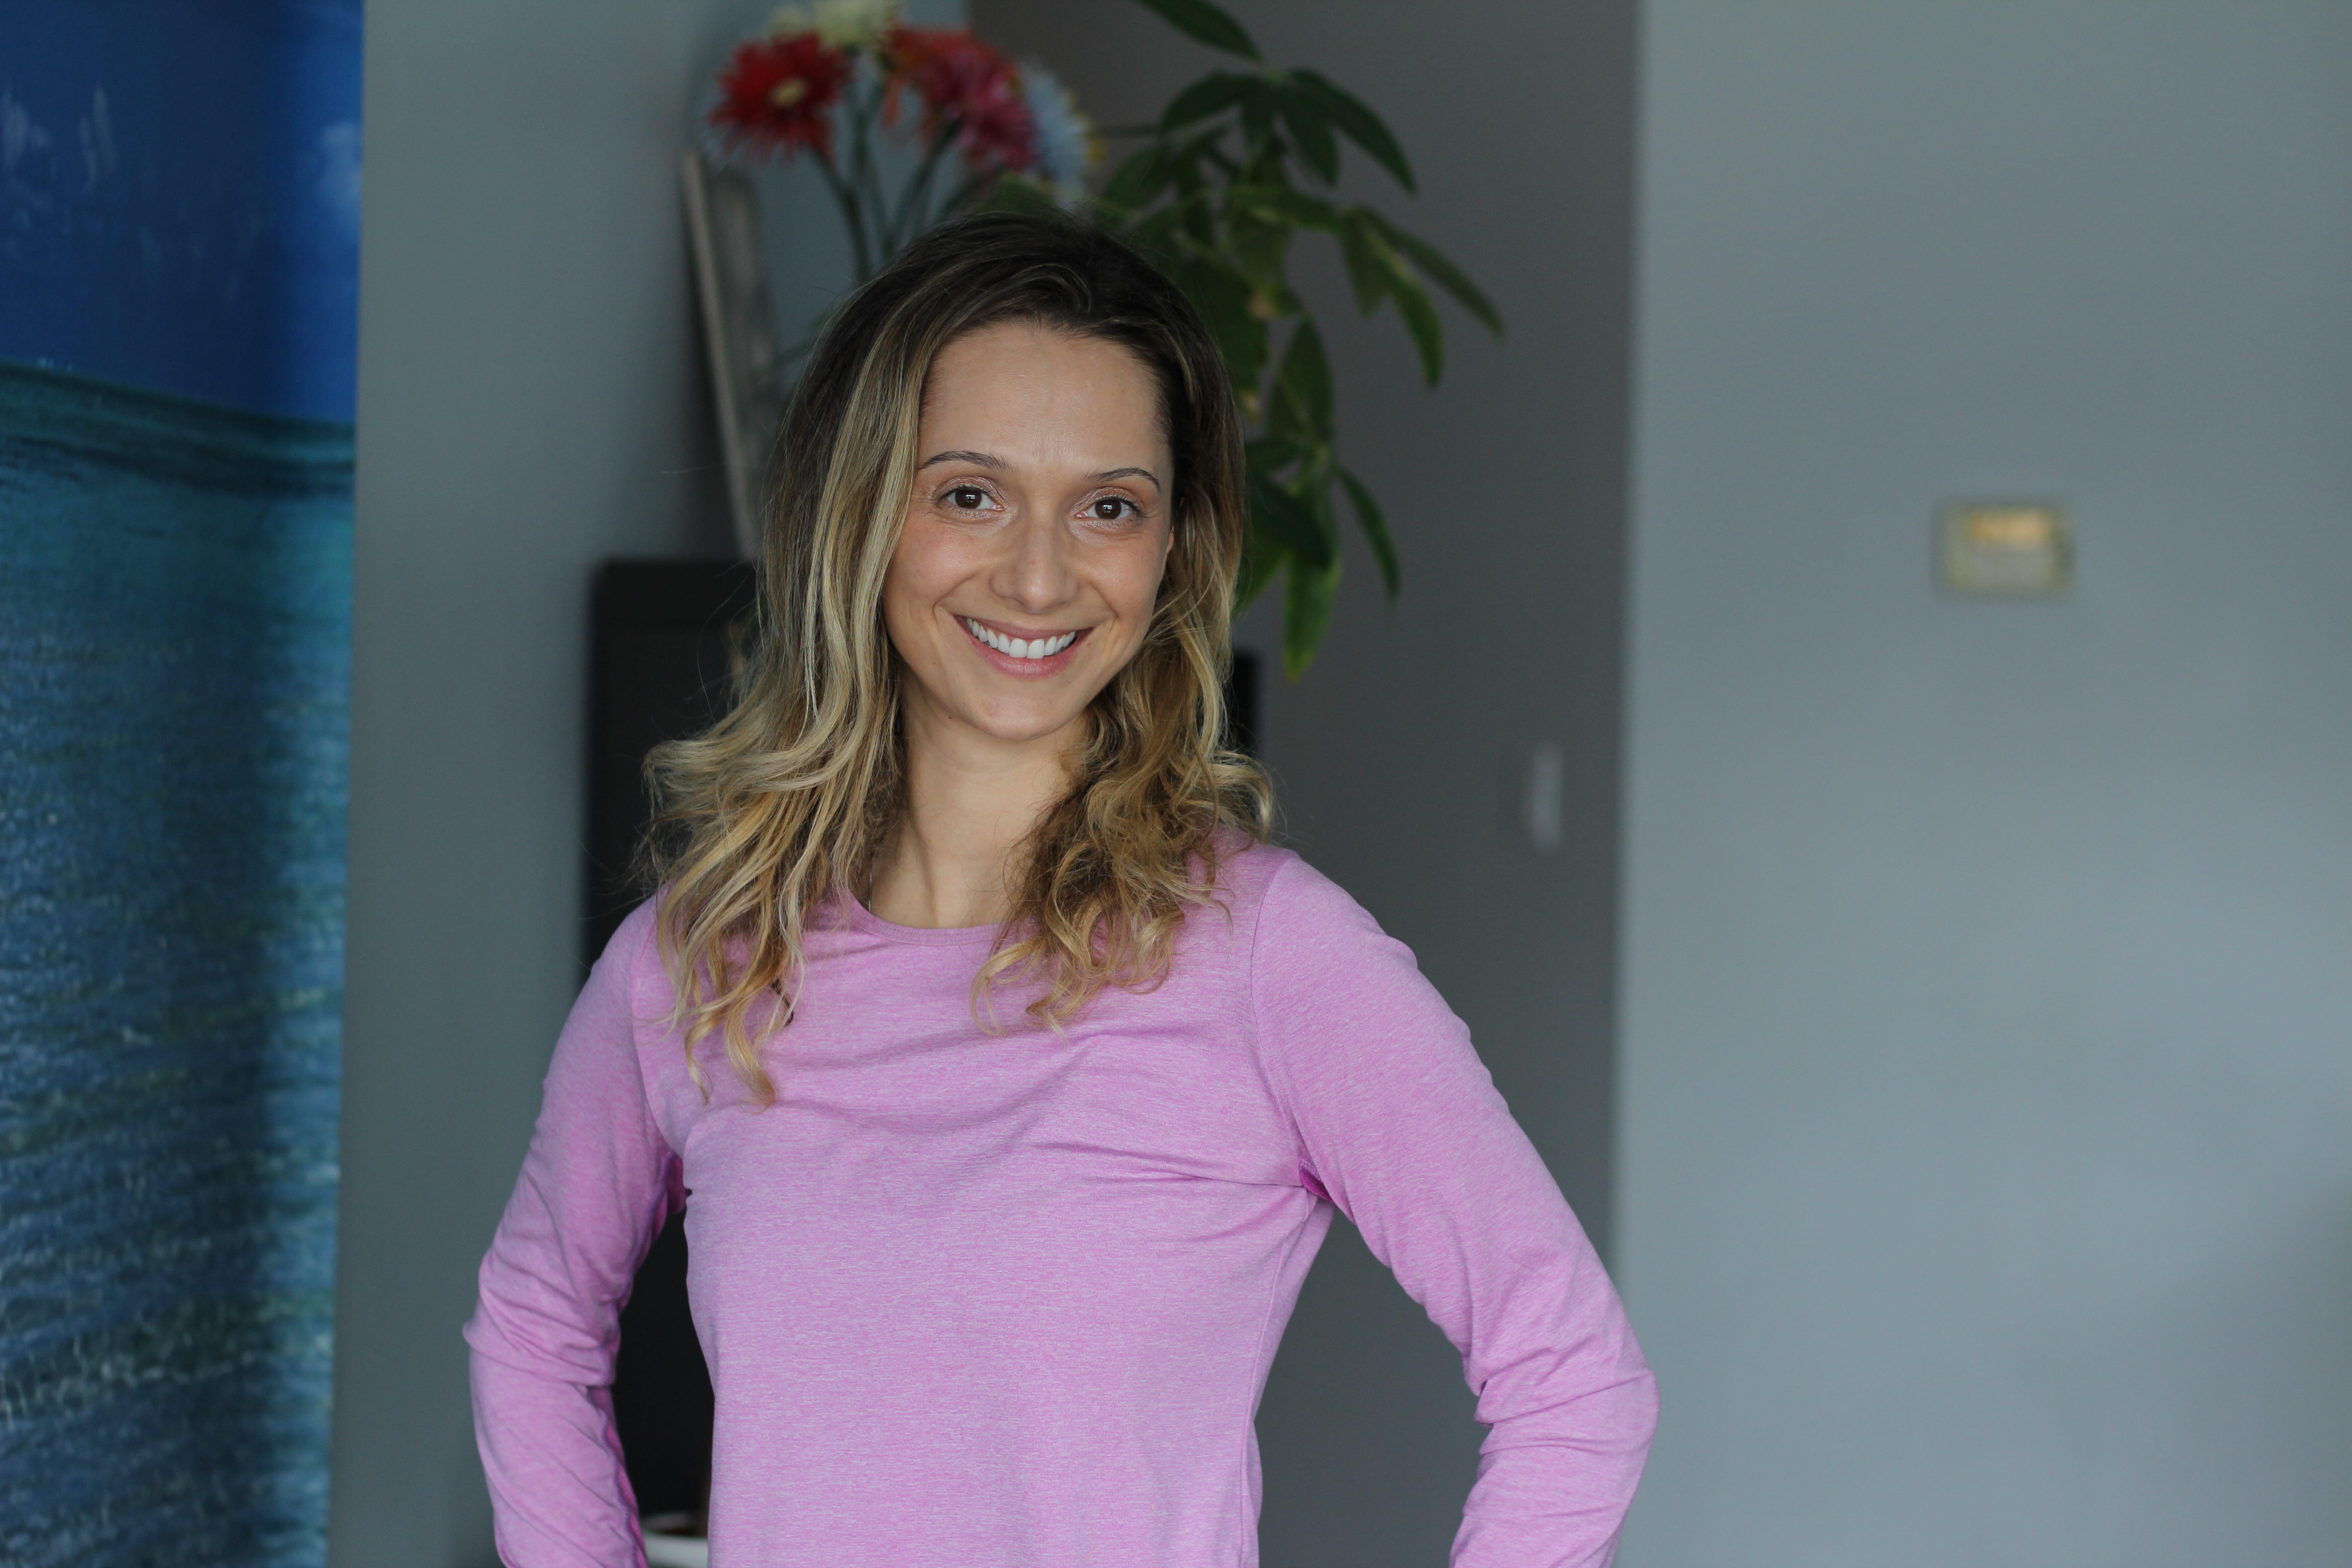 Portrait of yoga instructor Grabriela Nicole Doiu standing in pink yoga clothes in front of a shelf and plant.